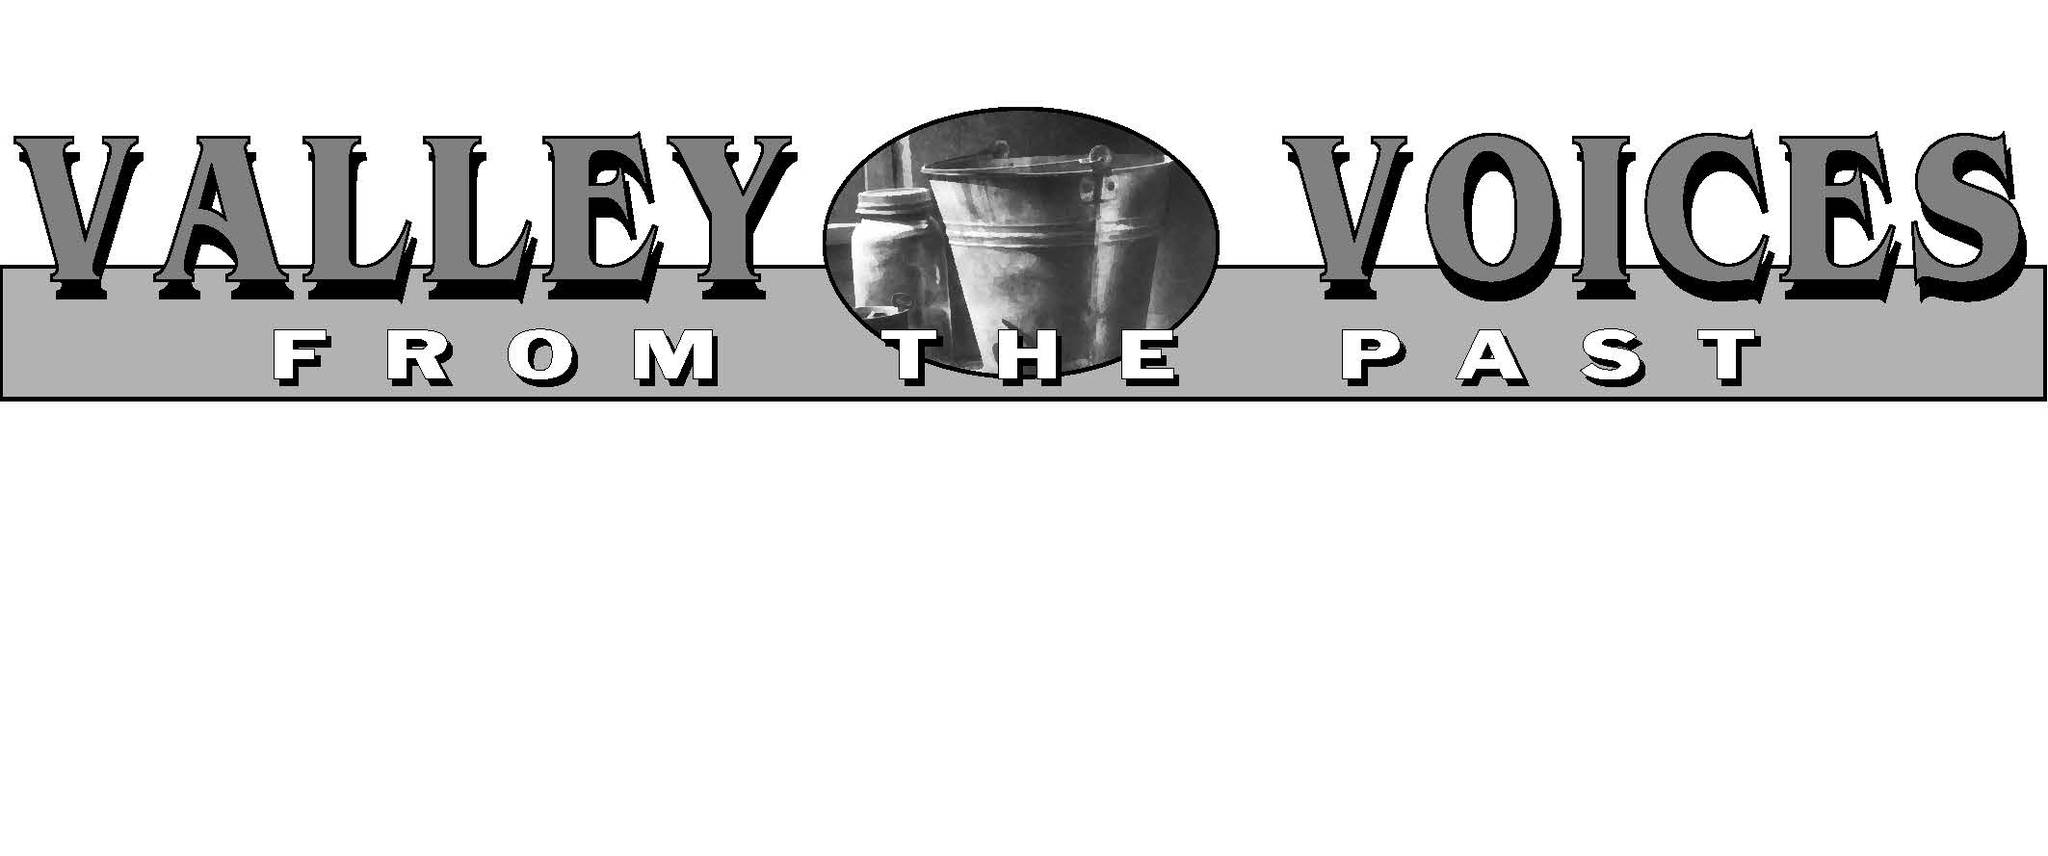 17819991_web1_valley-voice-from-the-past